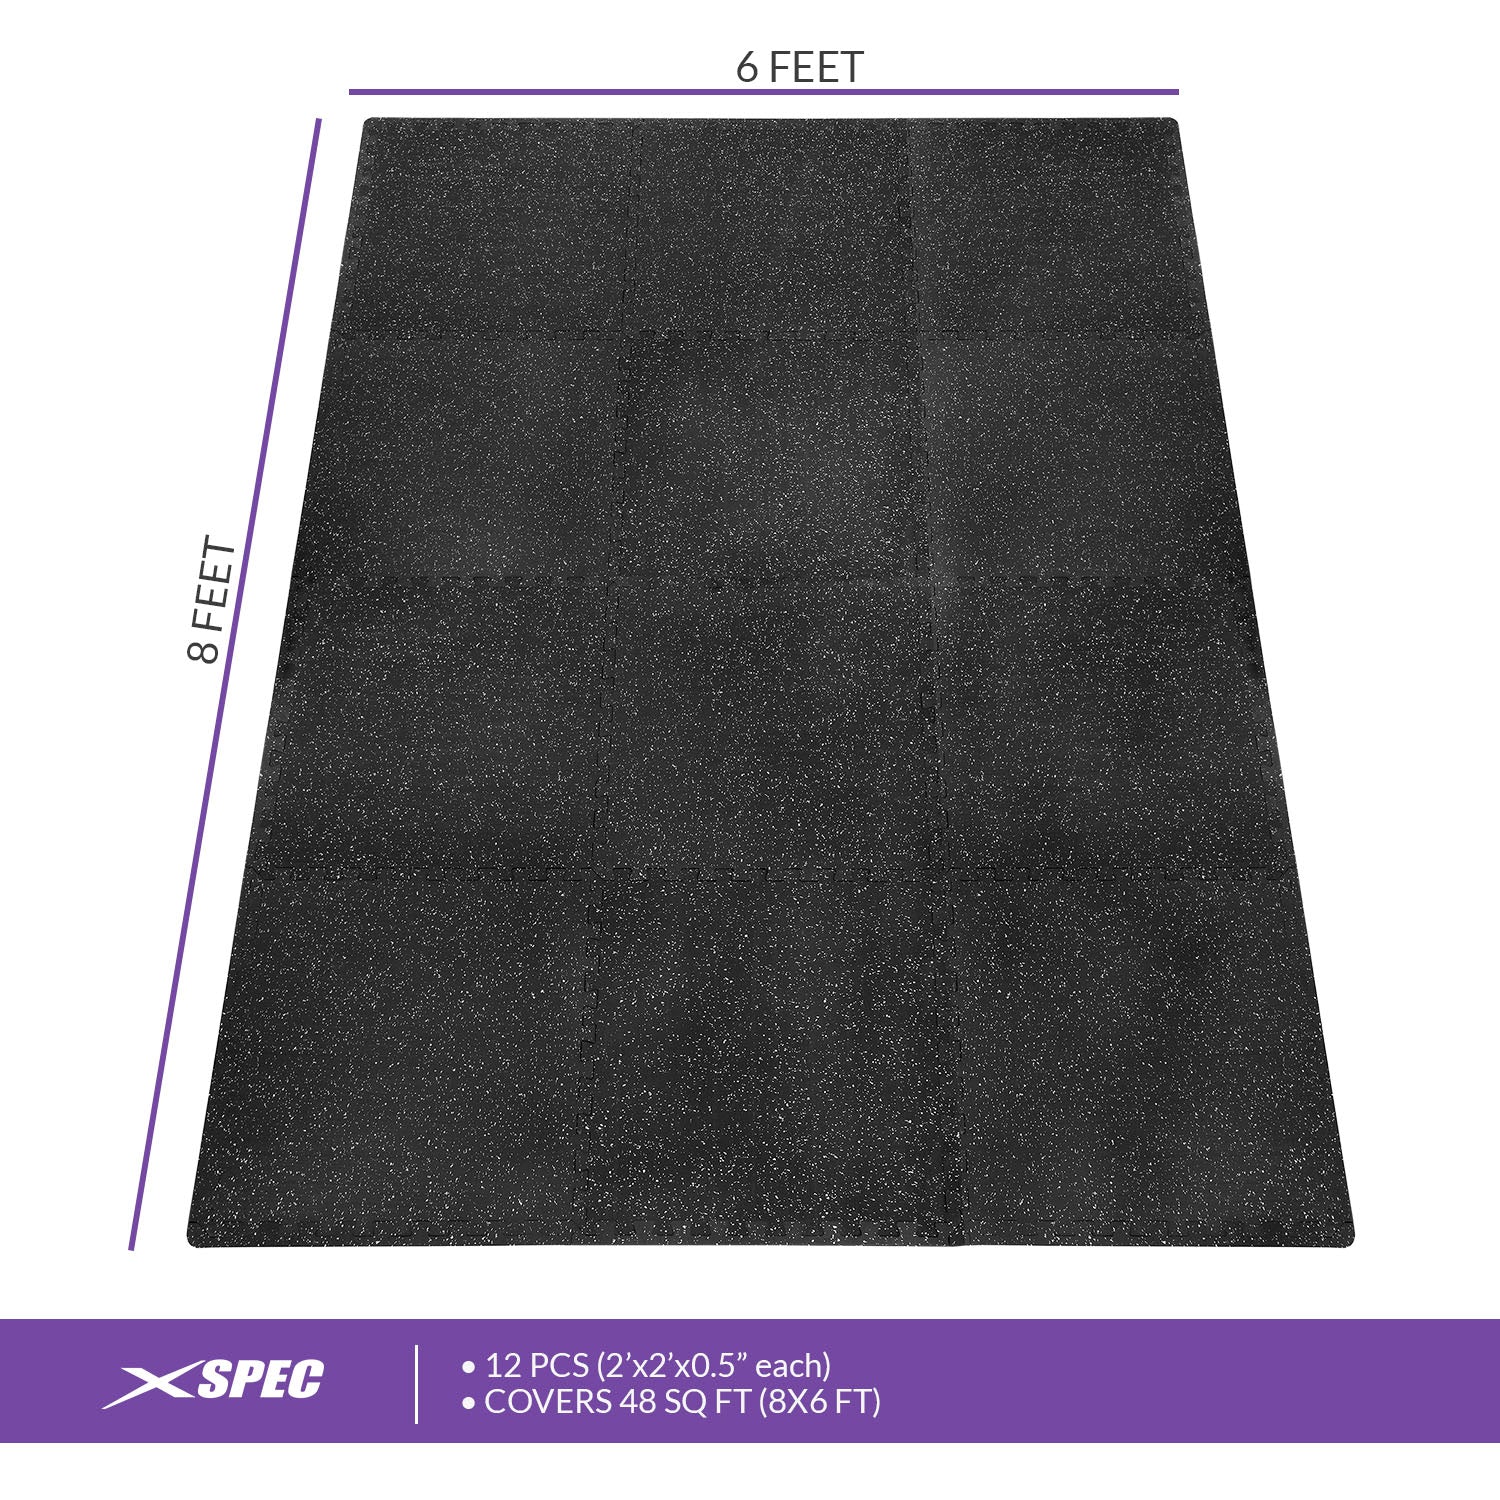 XPRT Fitness 1/2 In. Thick Interlocking Foam Floor Mat Exercise